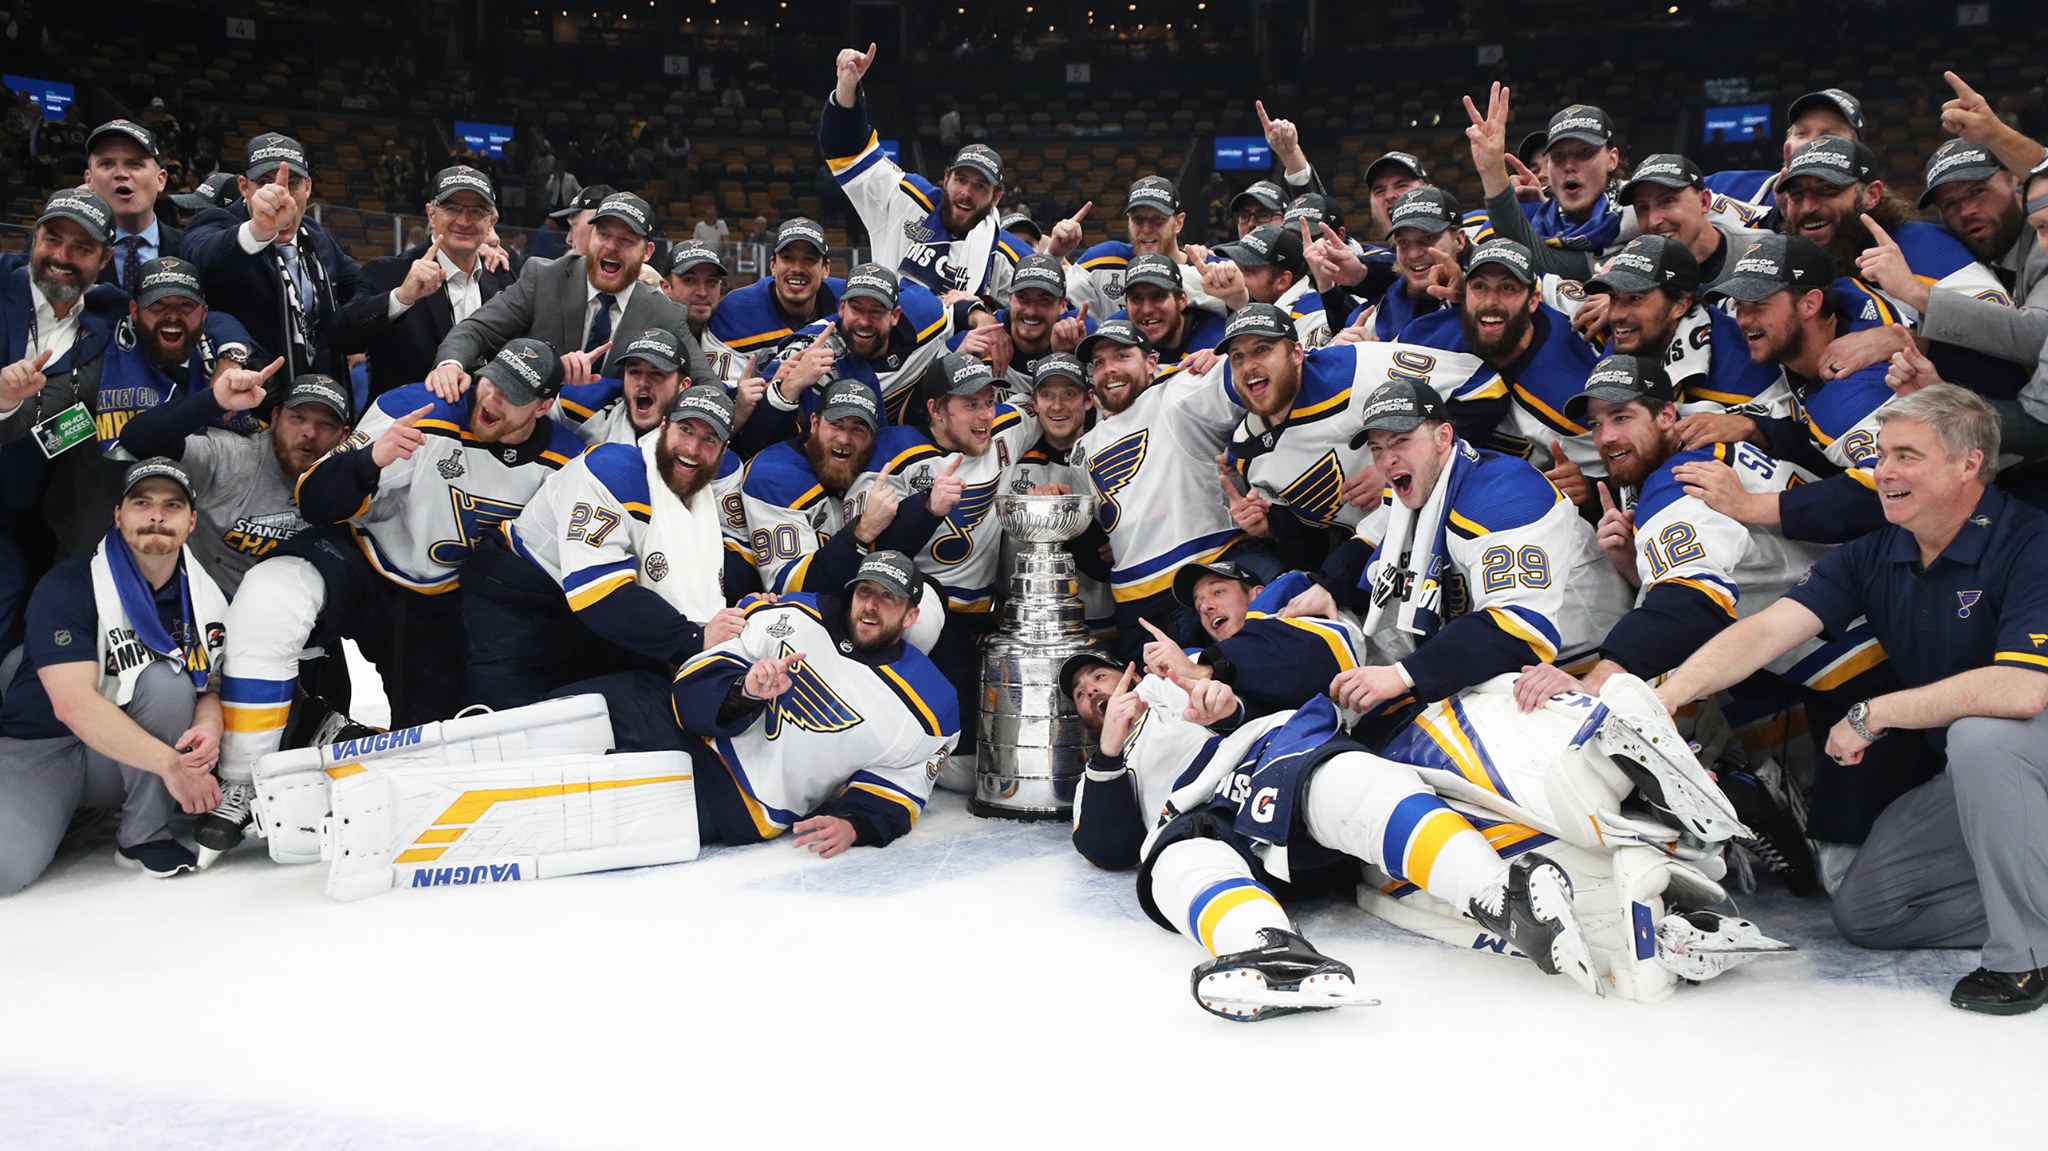 Play “Gloria” The St. Louis Blues Are the 2019 Stanley Cup Champions